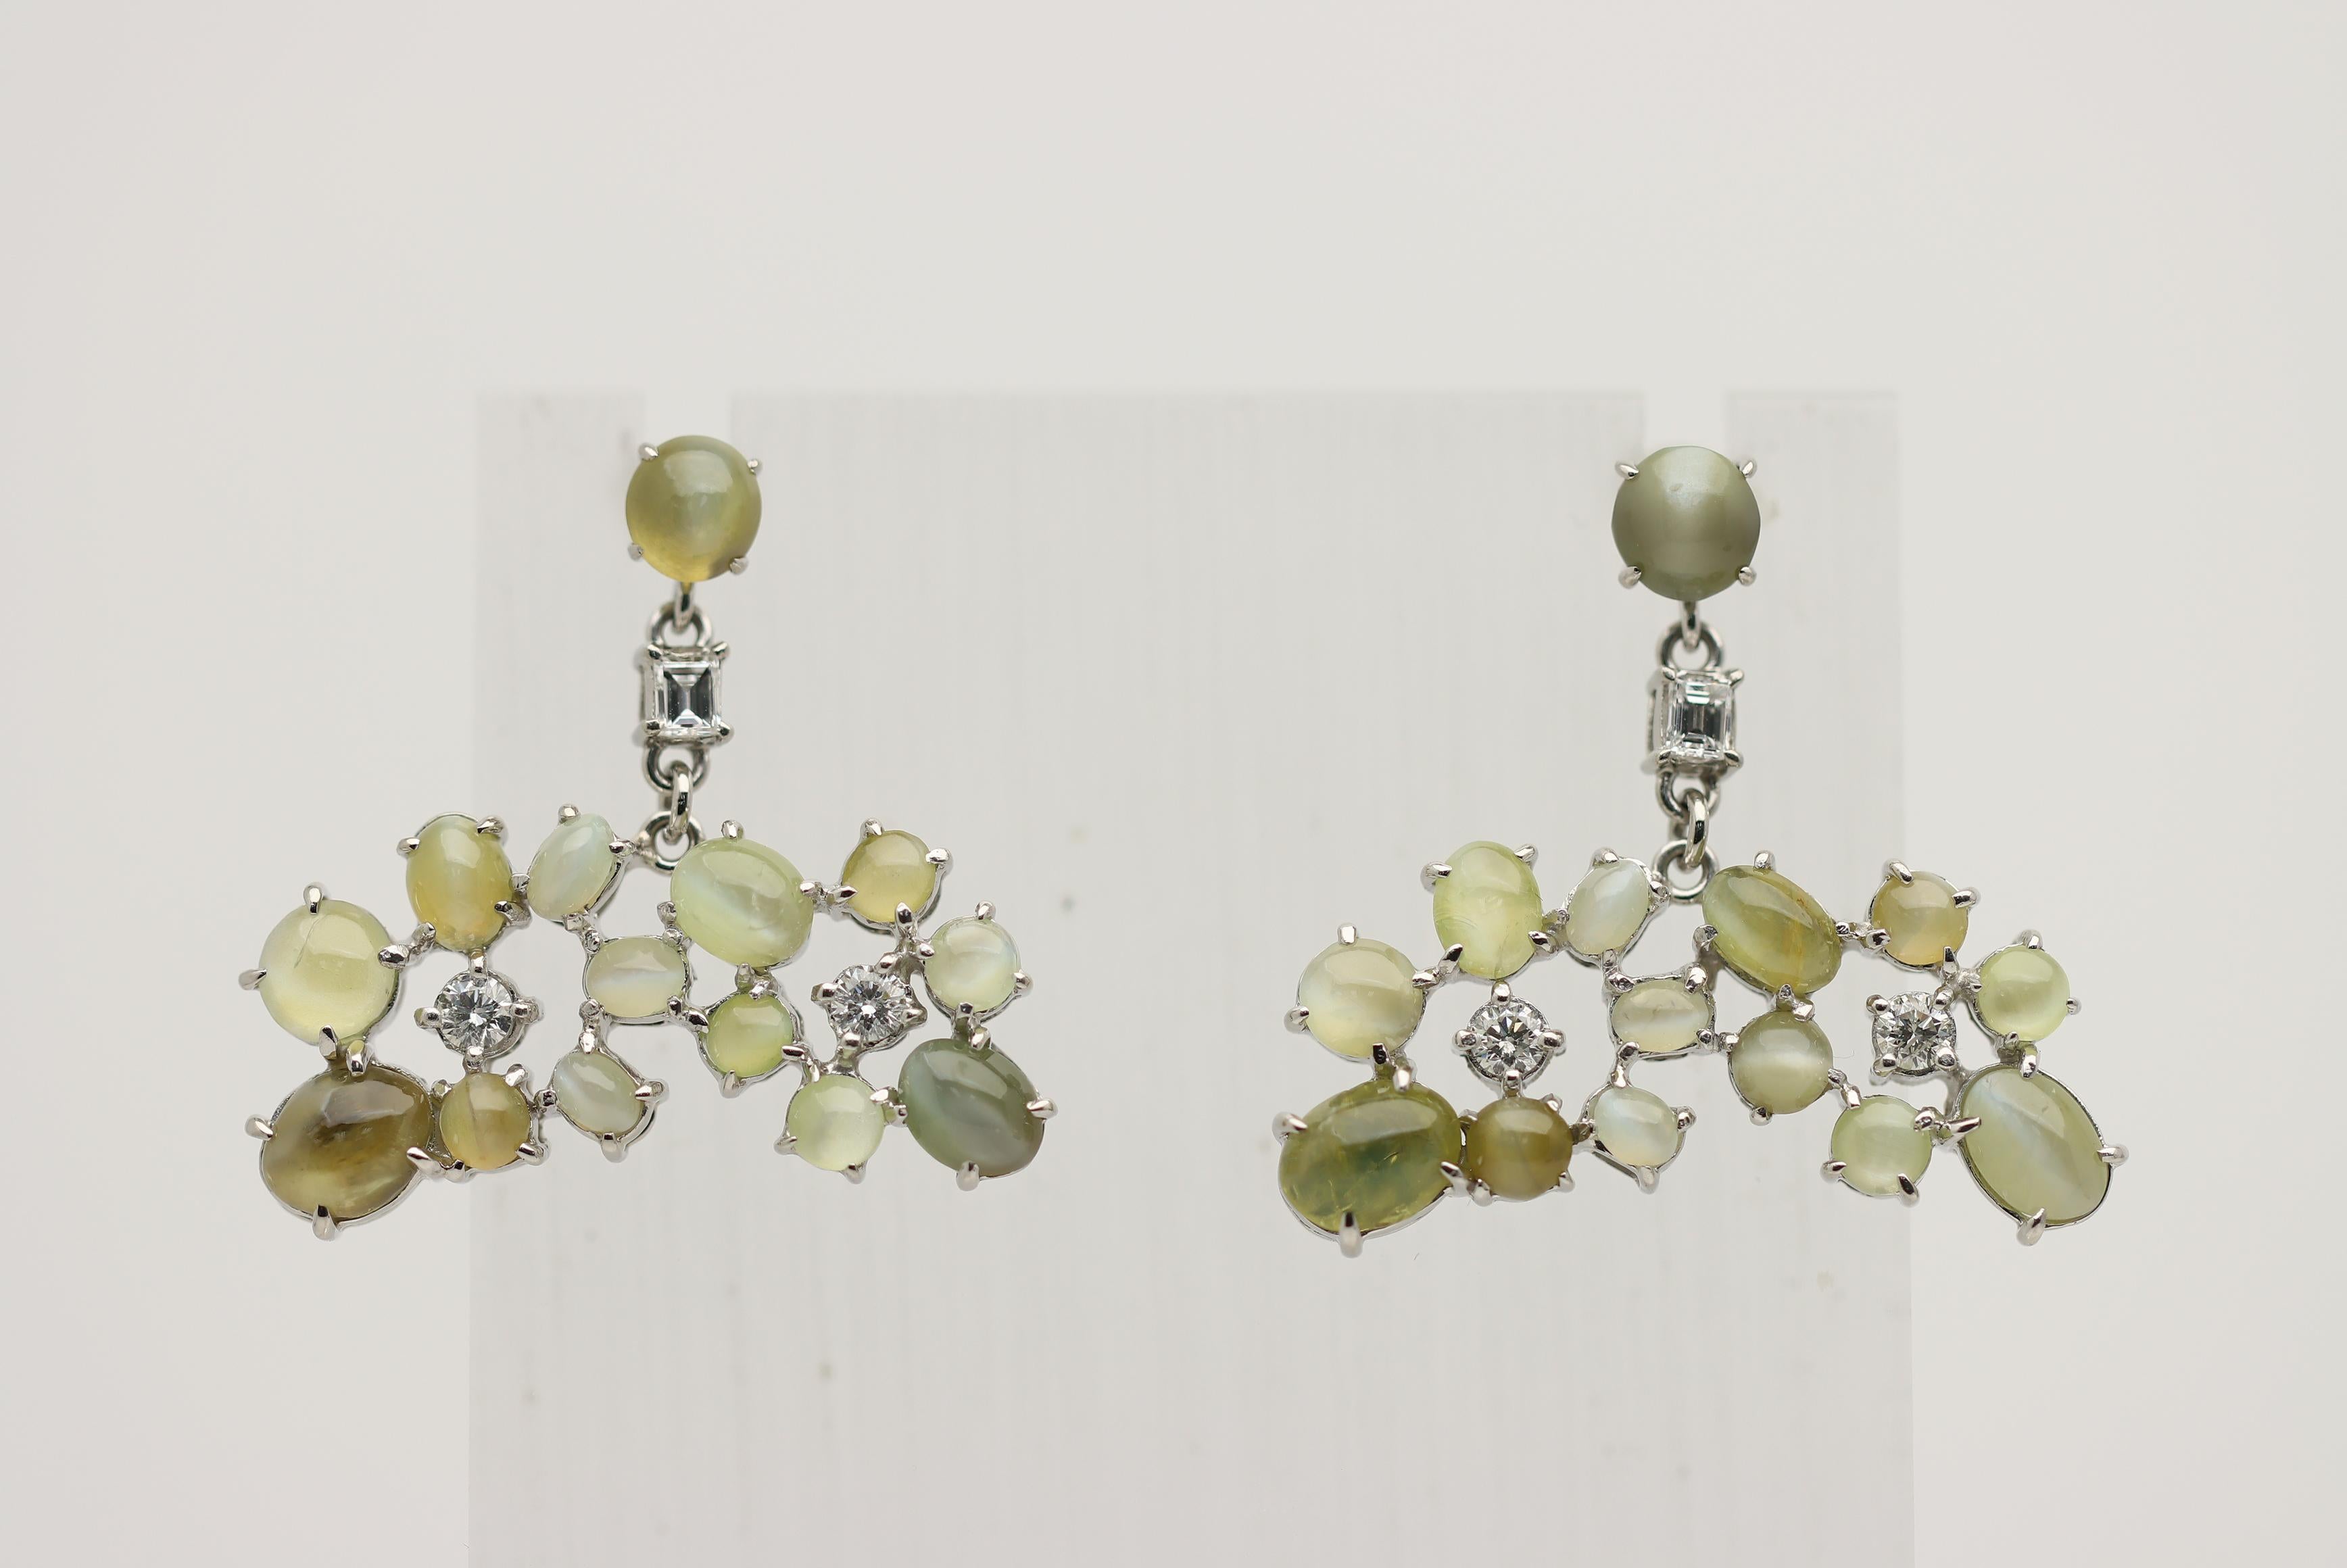 A unique, stylish, and fine pair of platinum drop earrings. They feature 26 cat eye chrysoberyls which weigh a total of 18.59 carats. Each stone has its own chatoyant eye giving the earrings a far-out look. It is complemented by 0.81 carats of round